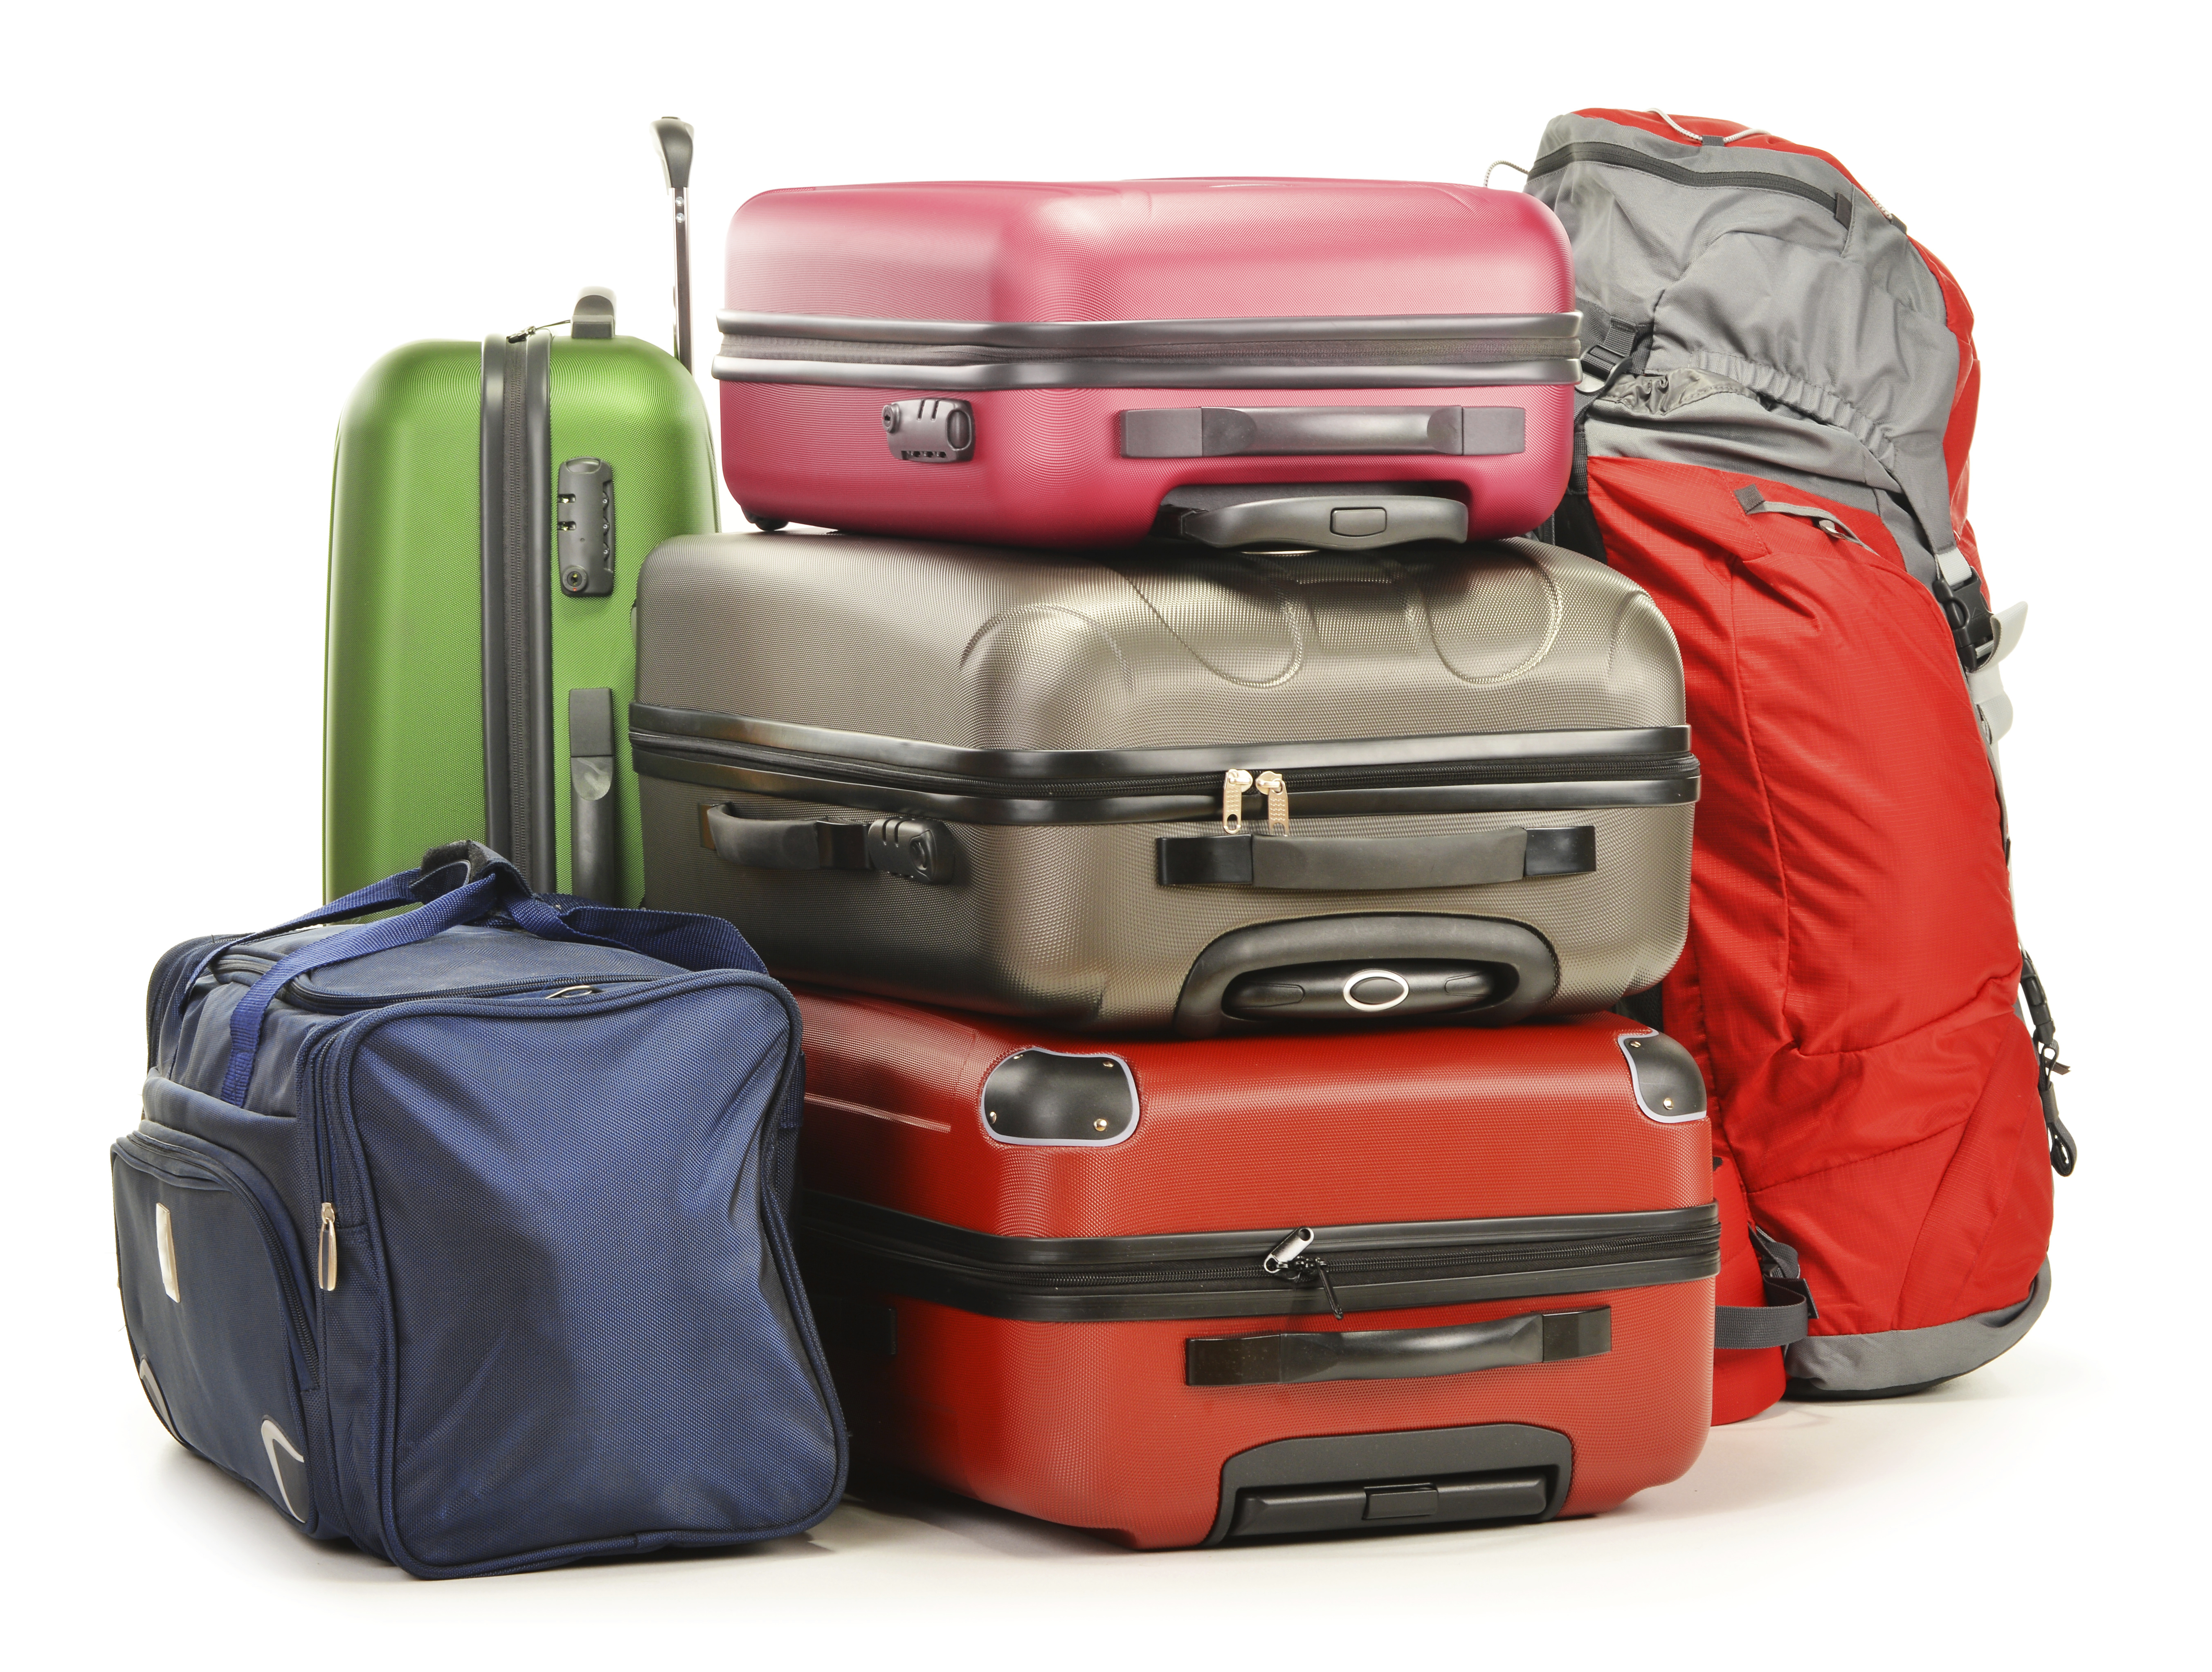 Lufthansa cabin baggage explained and how to maximize your hand luggage allowance | Skyscanner ...